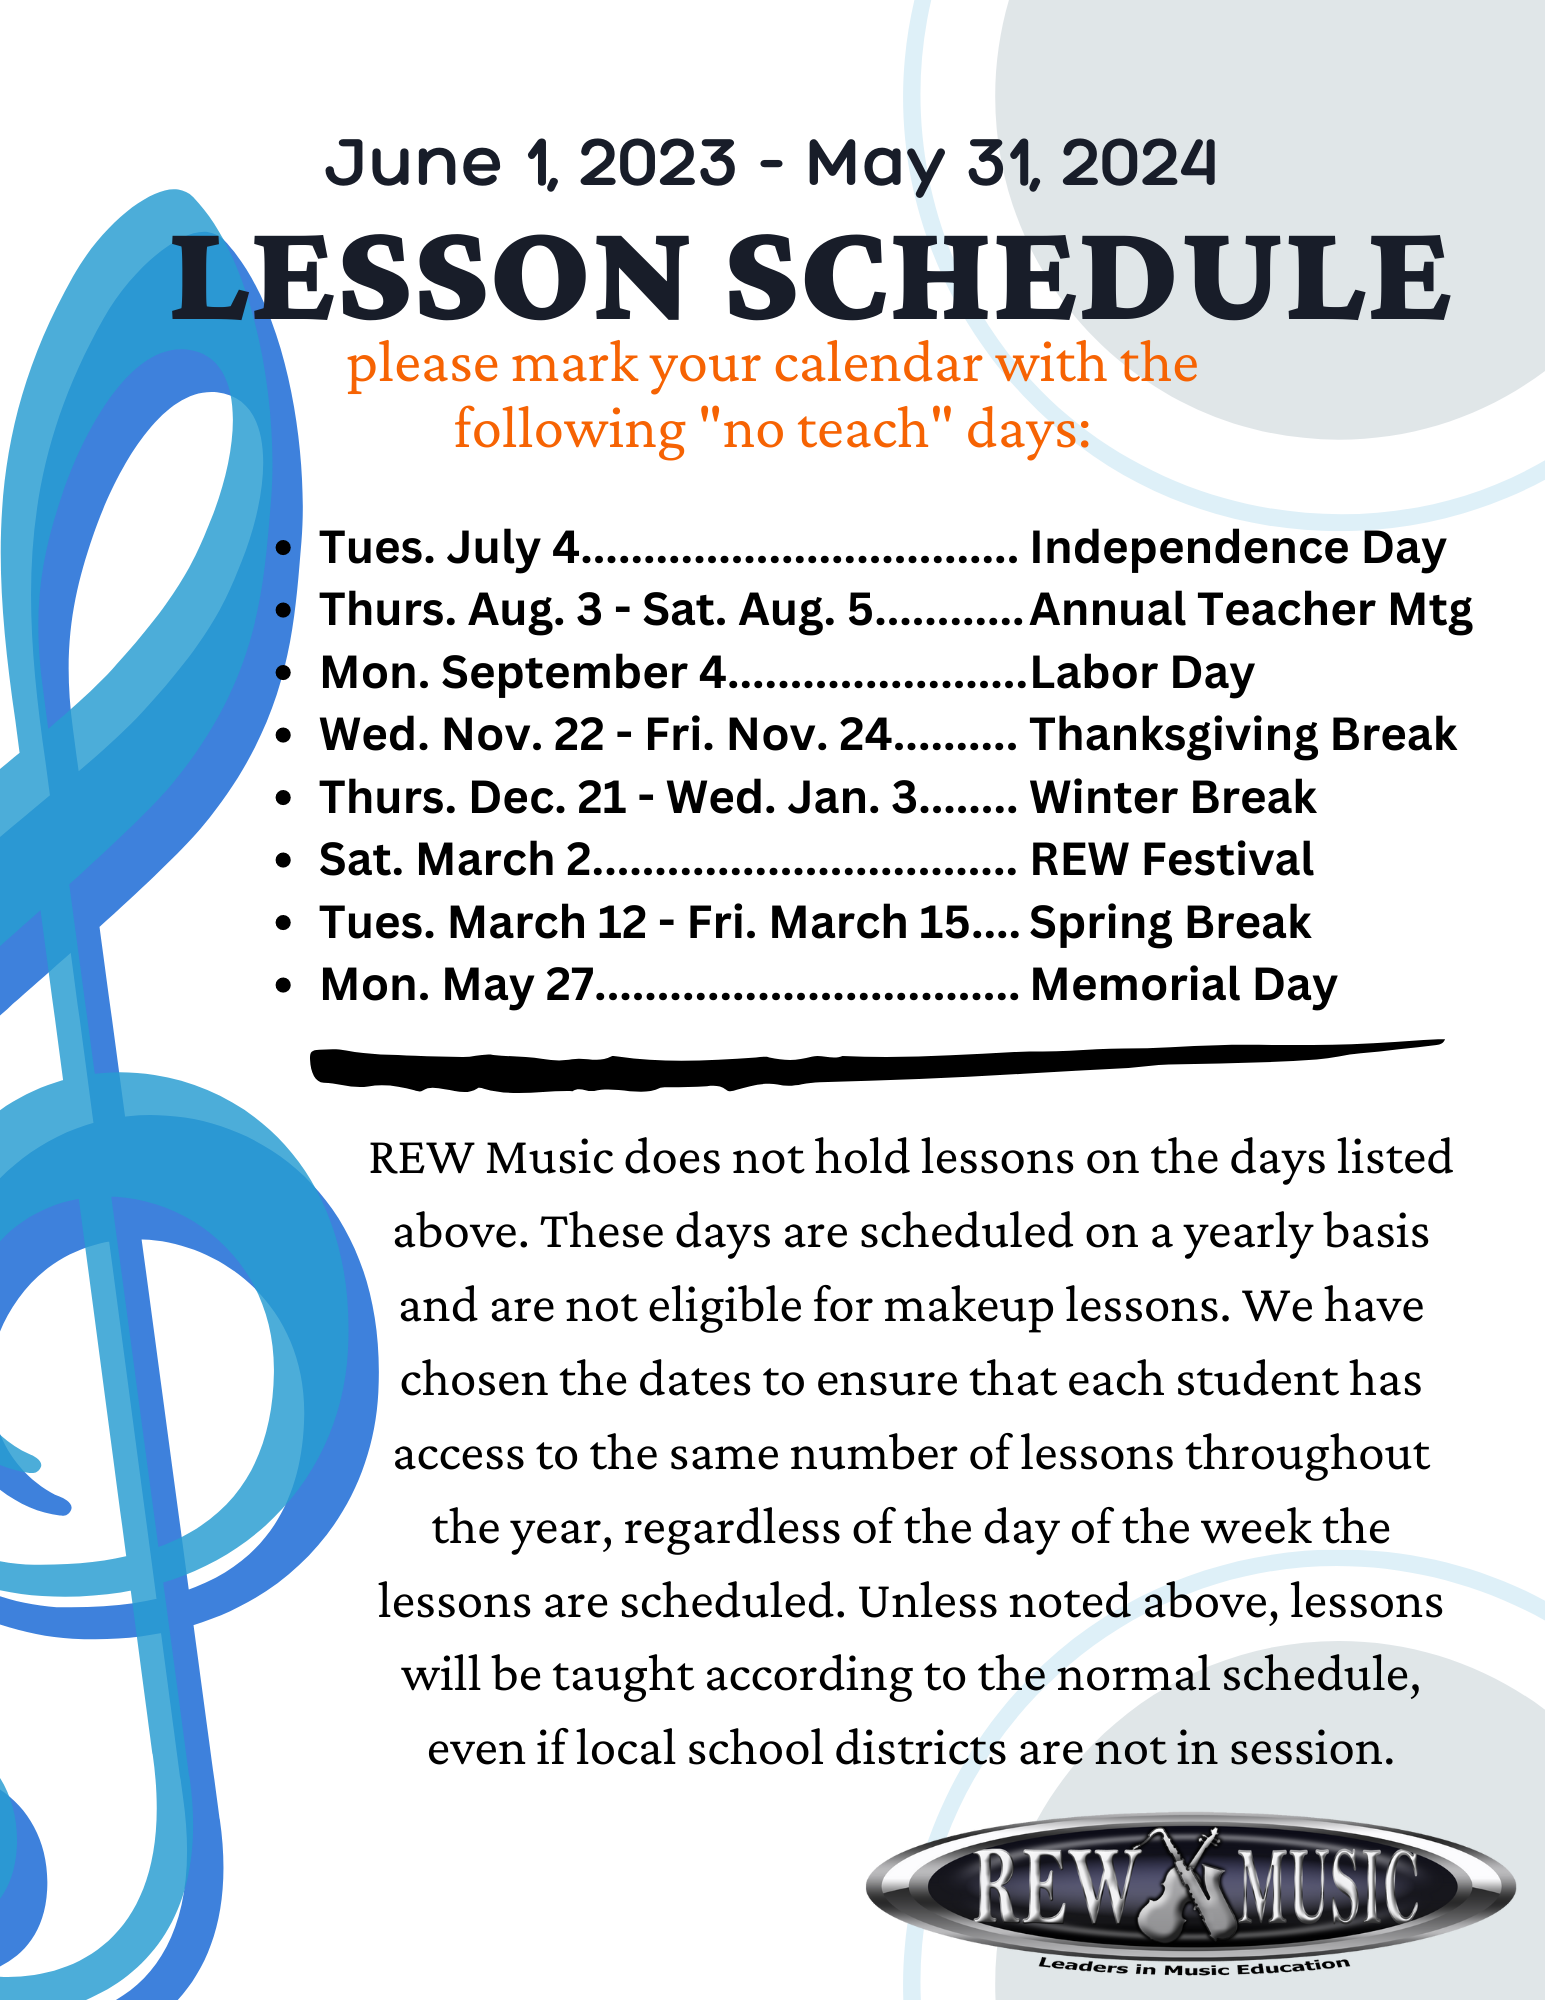 Lesson Schedule Holiday Dates